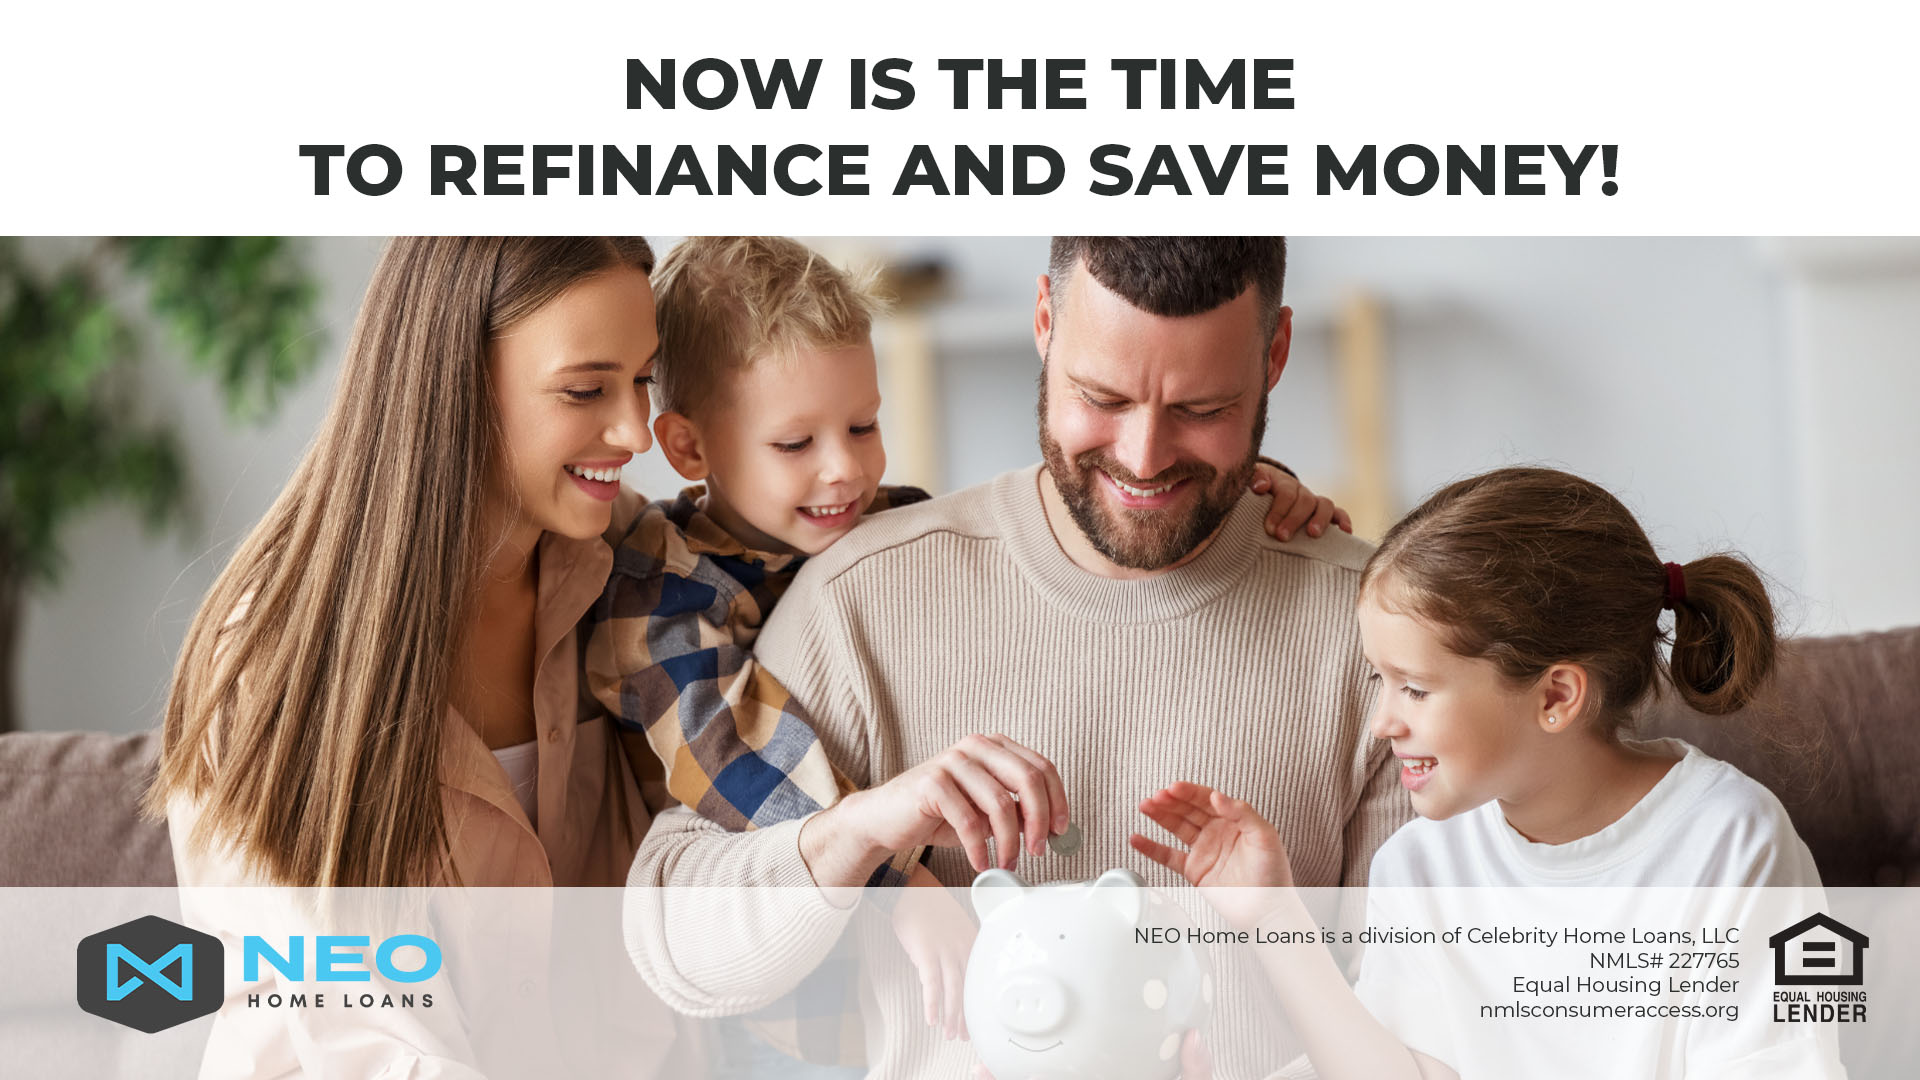 Now is the Time to Refinance and Save Money!